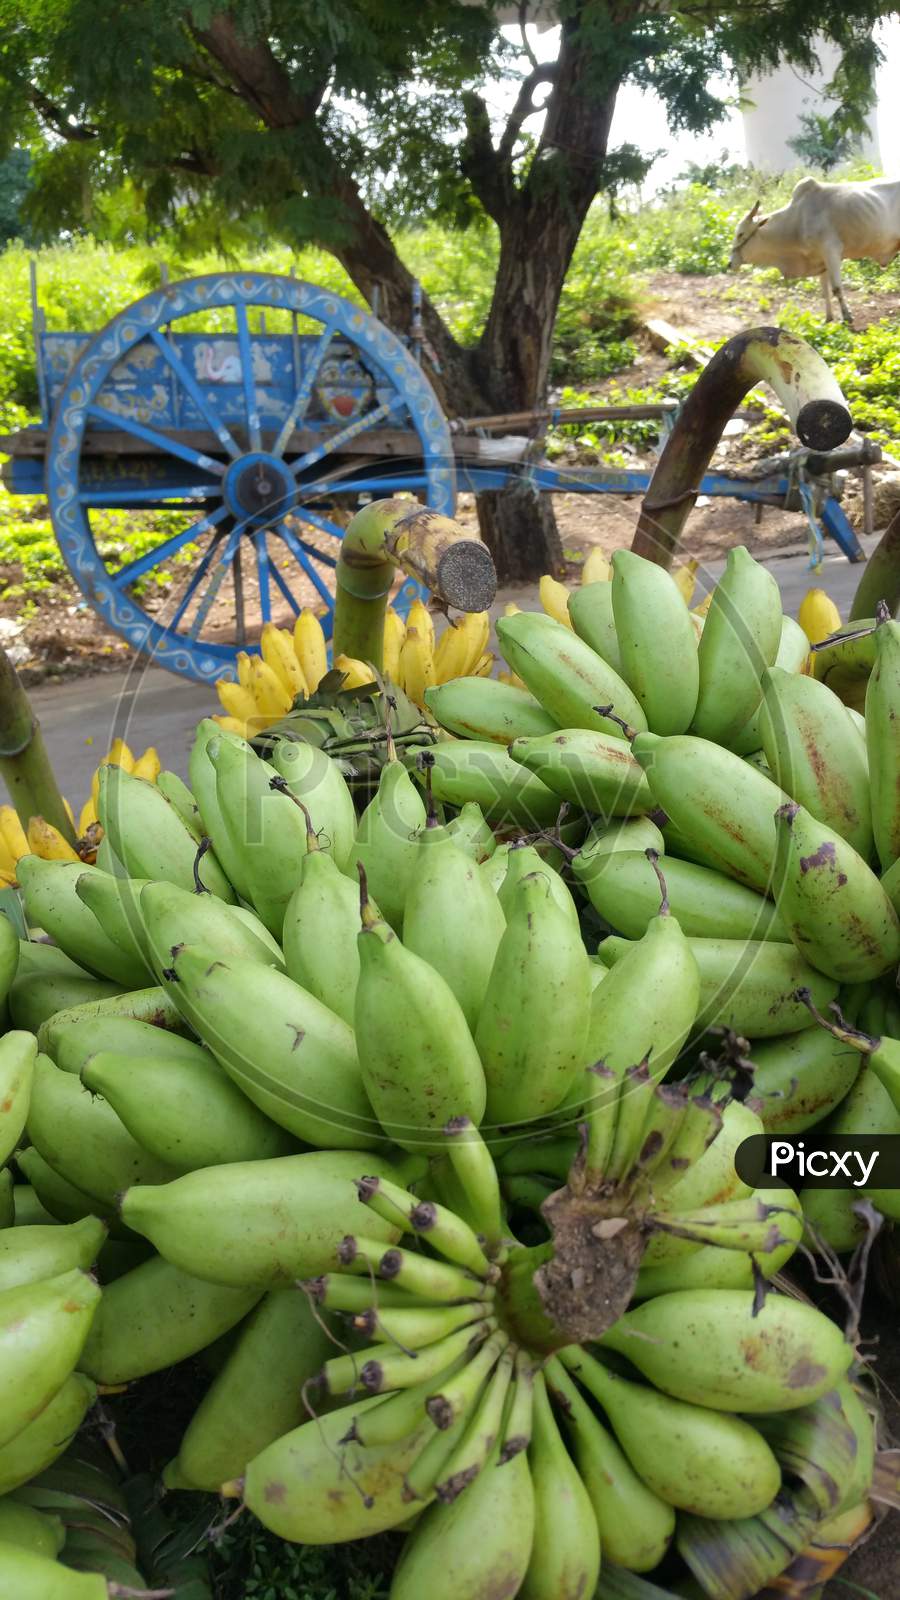 Scenic view of bananas against the backdrop of bullock cart